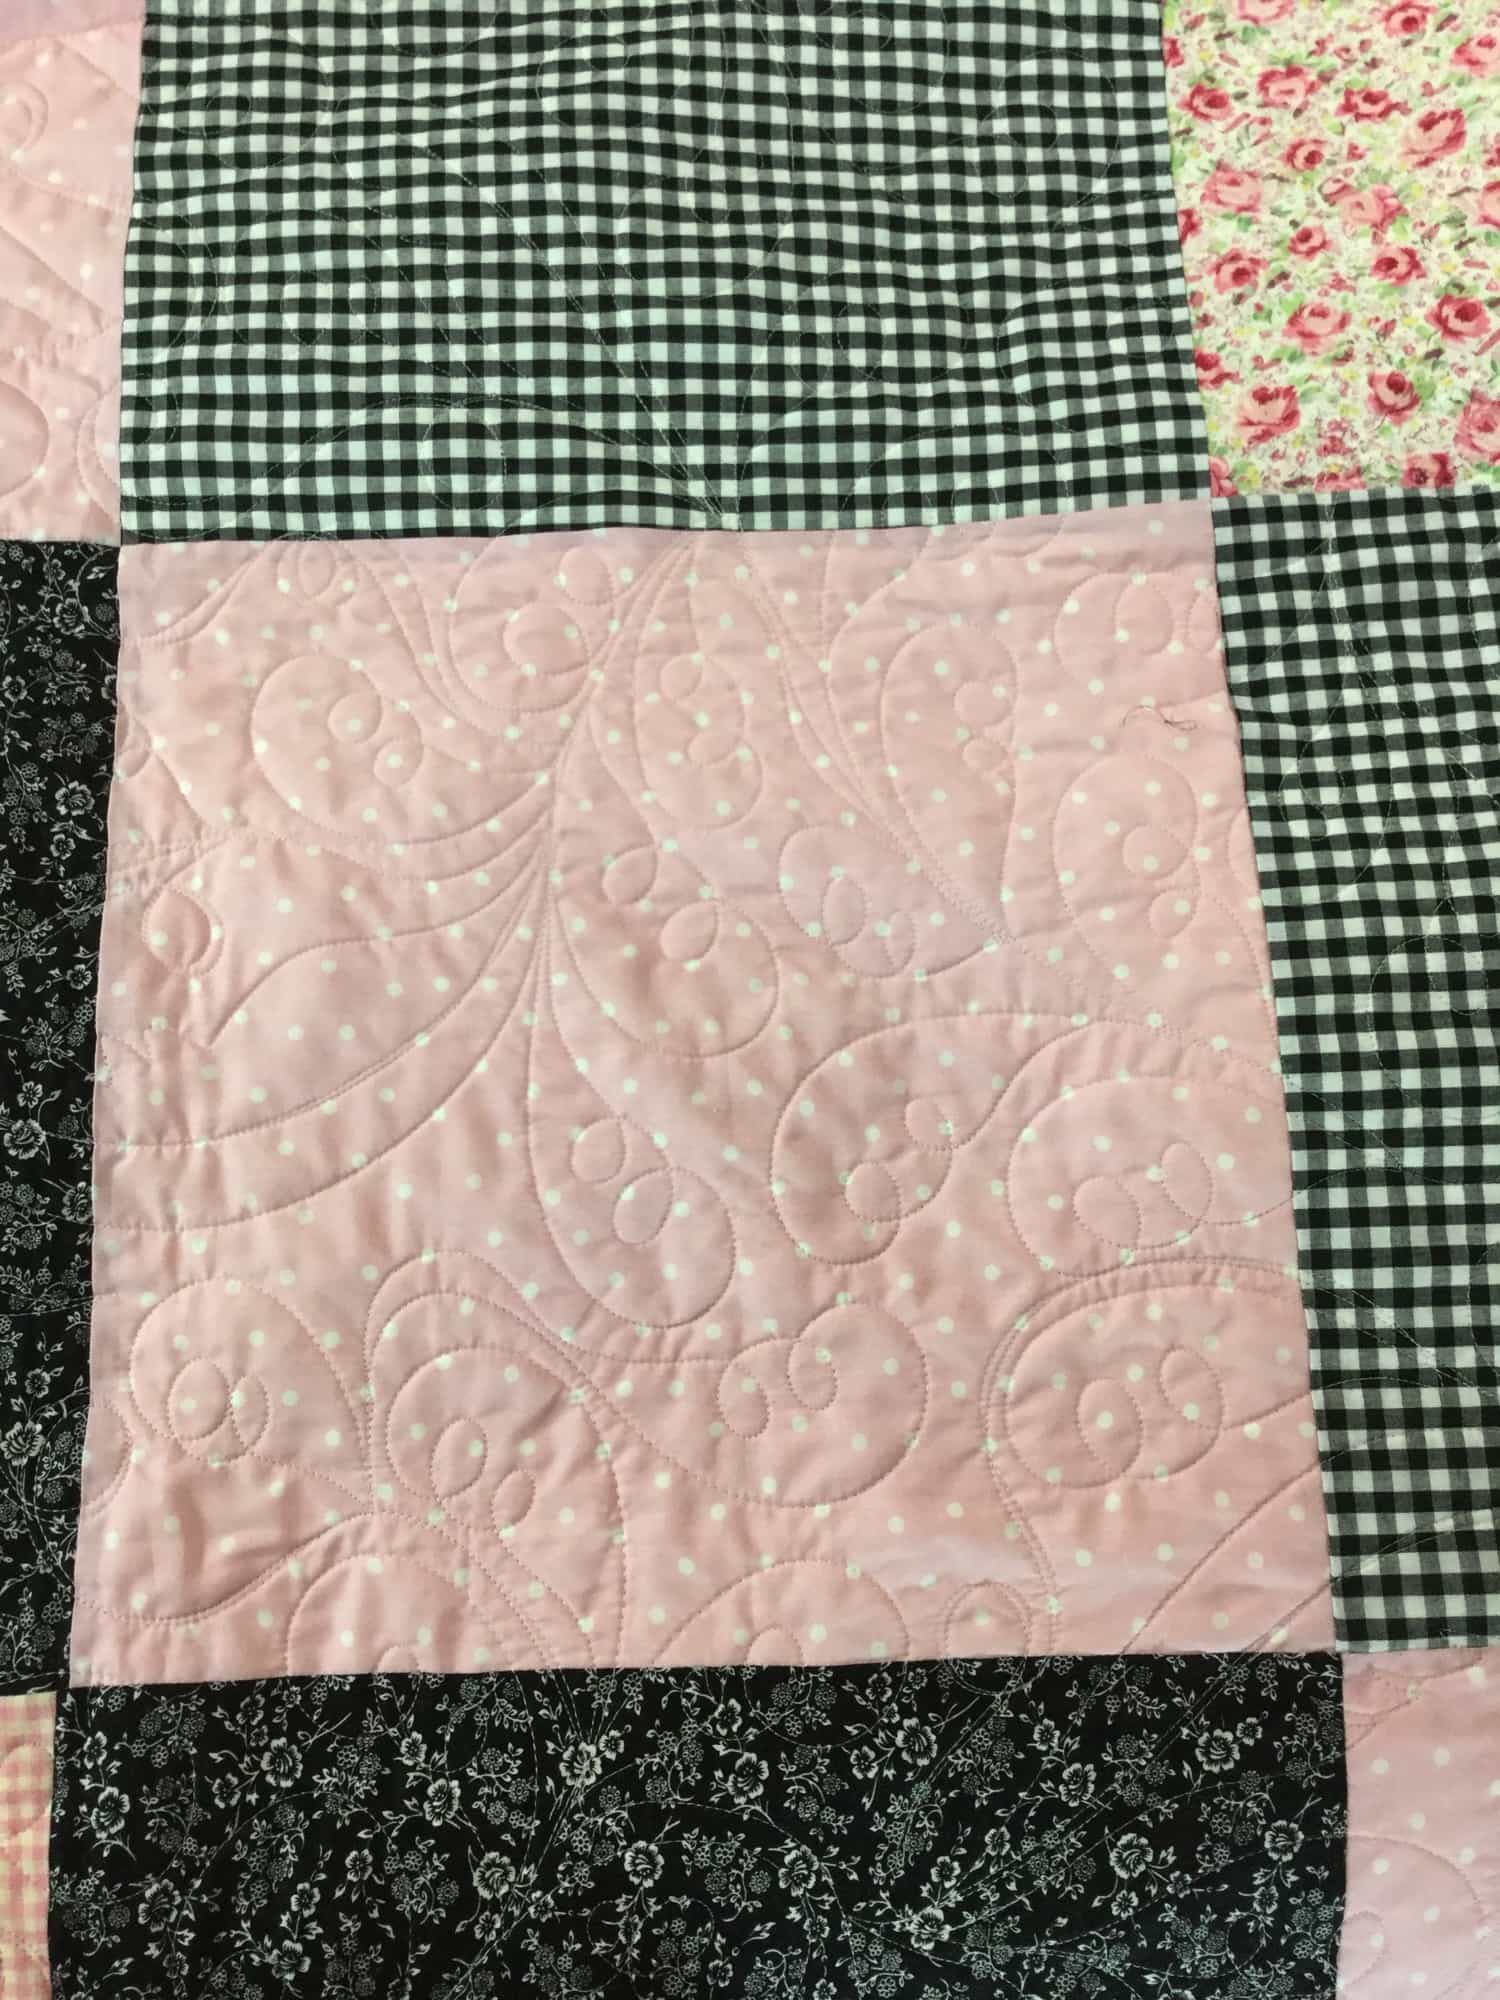 Close up of patch style quilt